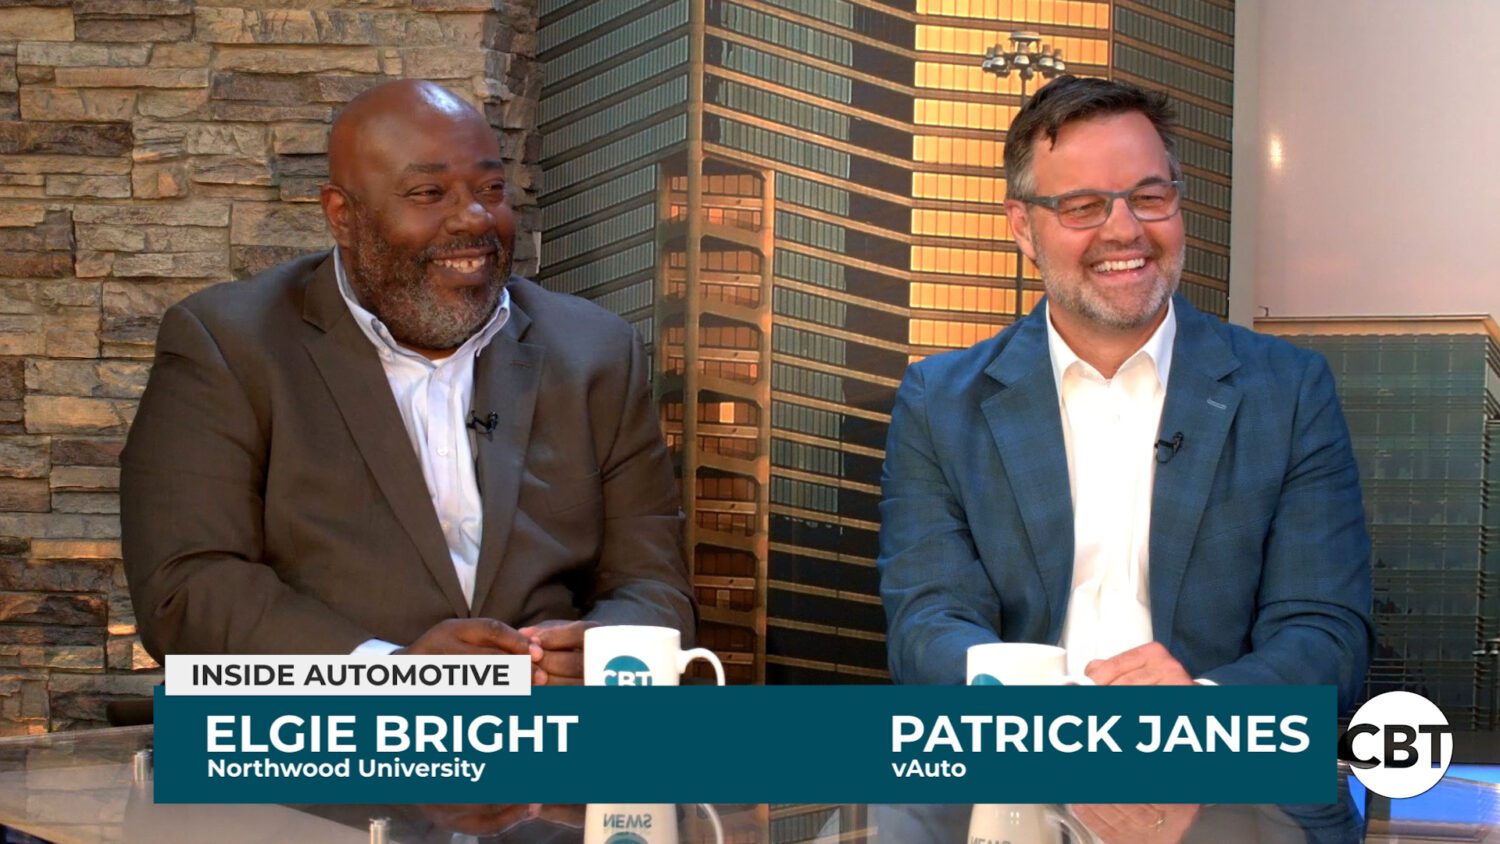 On today’s edition of Inside Automotive, we’re joined in the studio by Elgie Bright from Northwood University, and vAuto's, Patrick Janes.